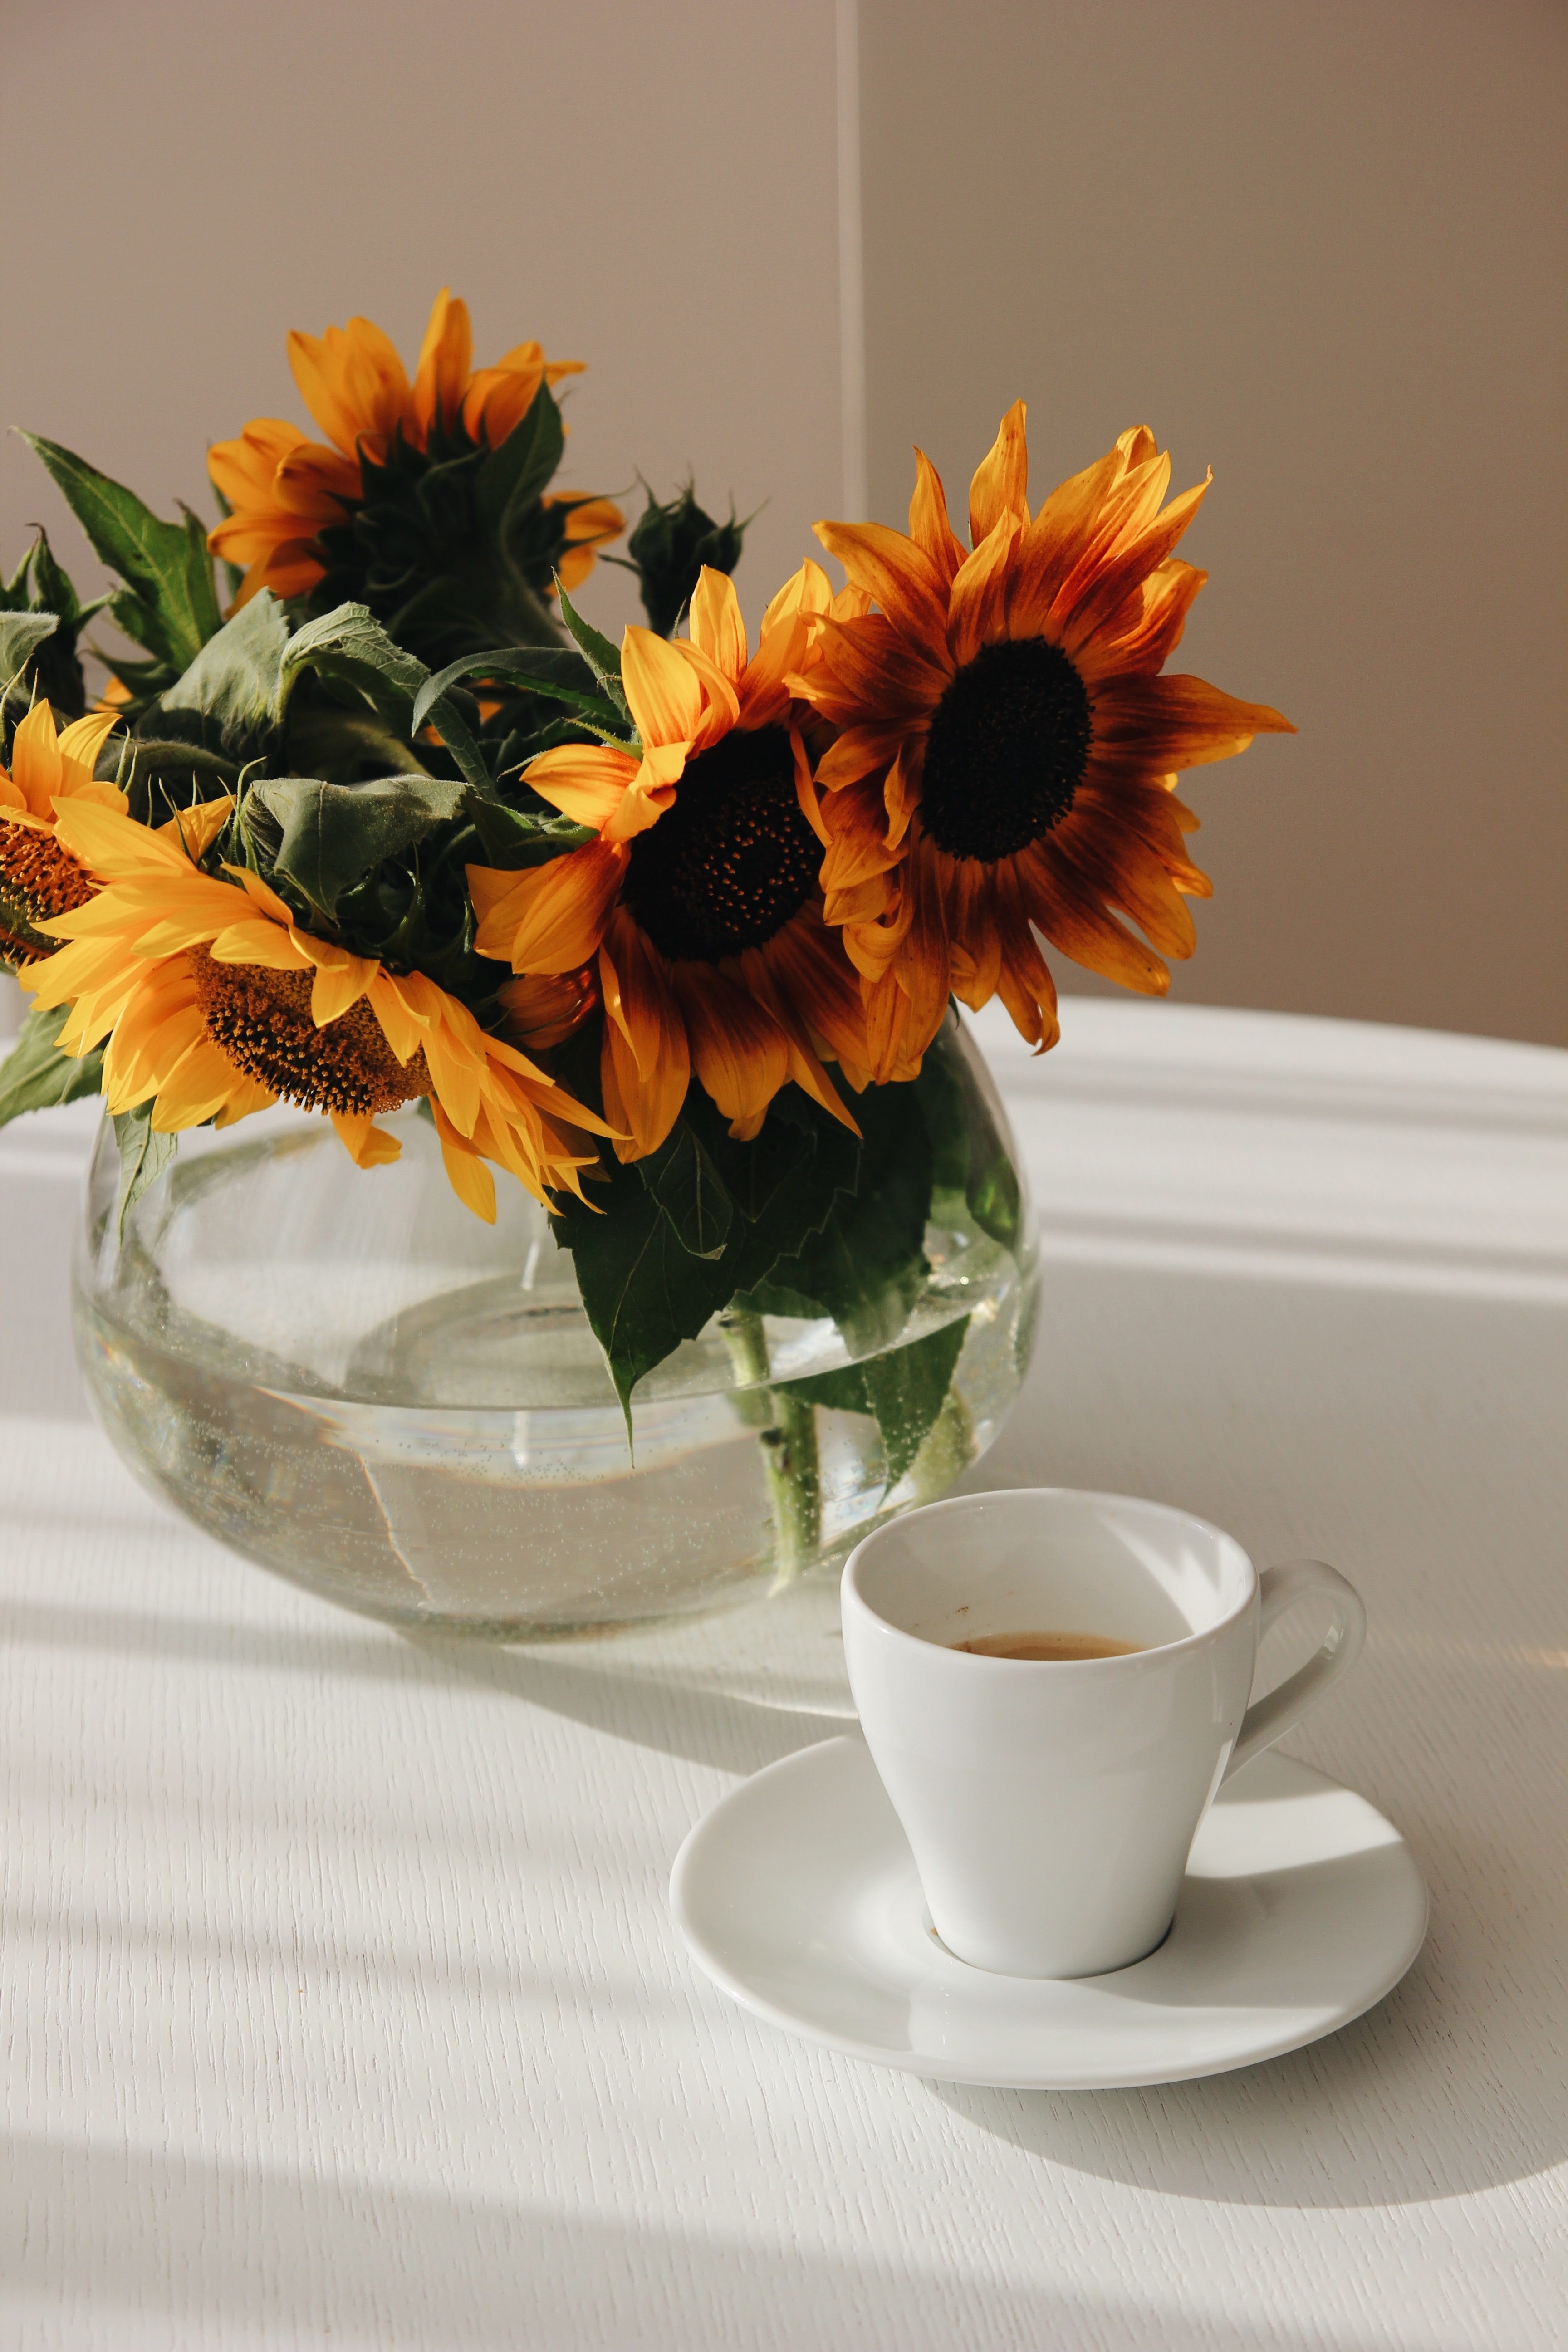 68145 download wallpaper sunflowers, flowers, cup, bouquet, table, vase screensavers and pictures for free